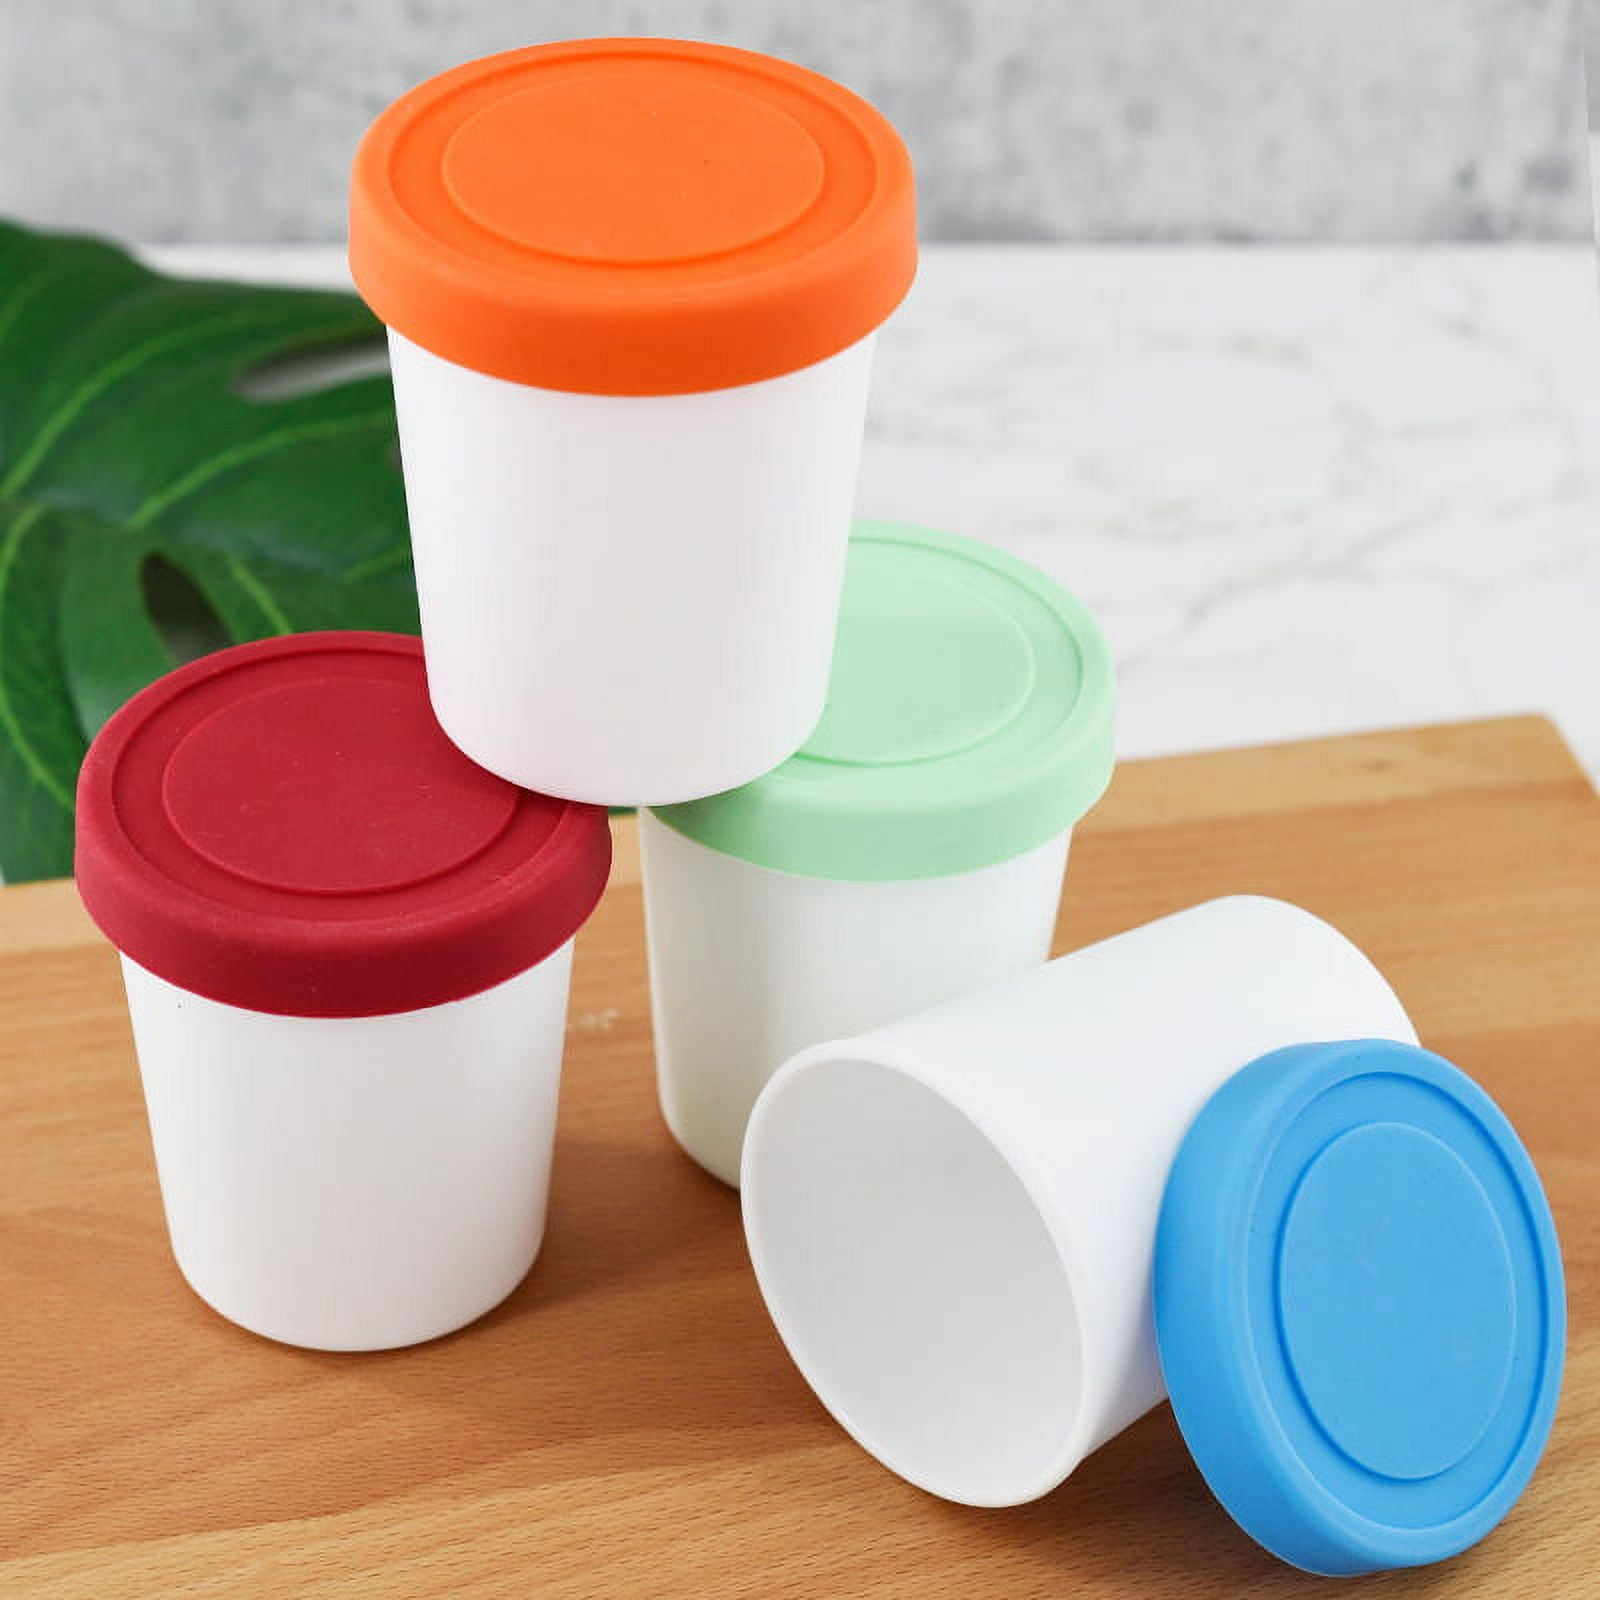 2PCS Ice Cream Containers, 1 Quart/Each Freezer Containers Reusable Ice  Cream Storage Tubs with Lids for Homemade IceCream Frozen Yogurt Sorbet -  RED